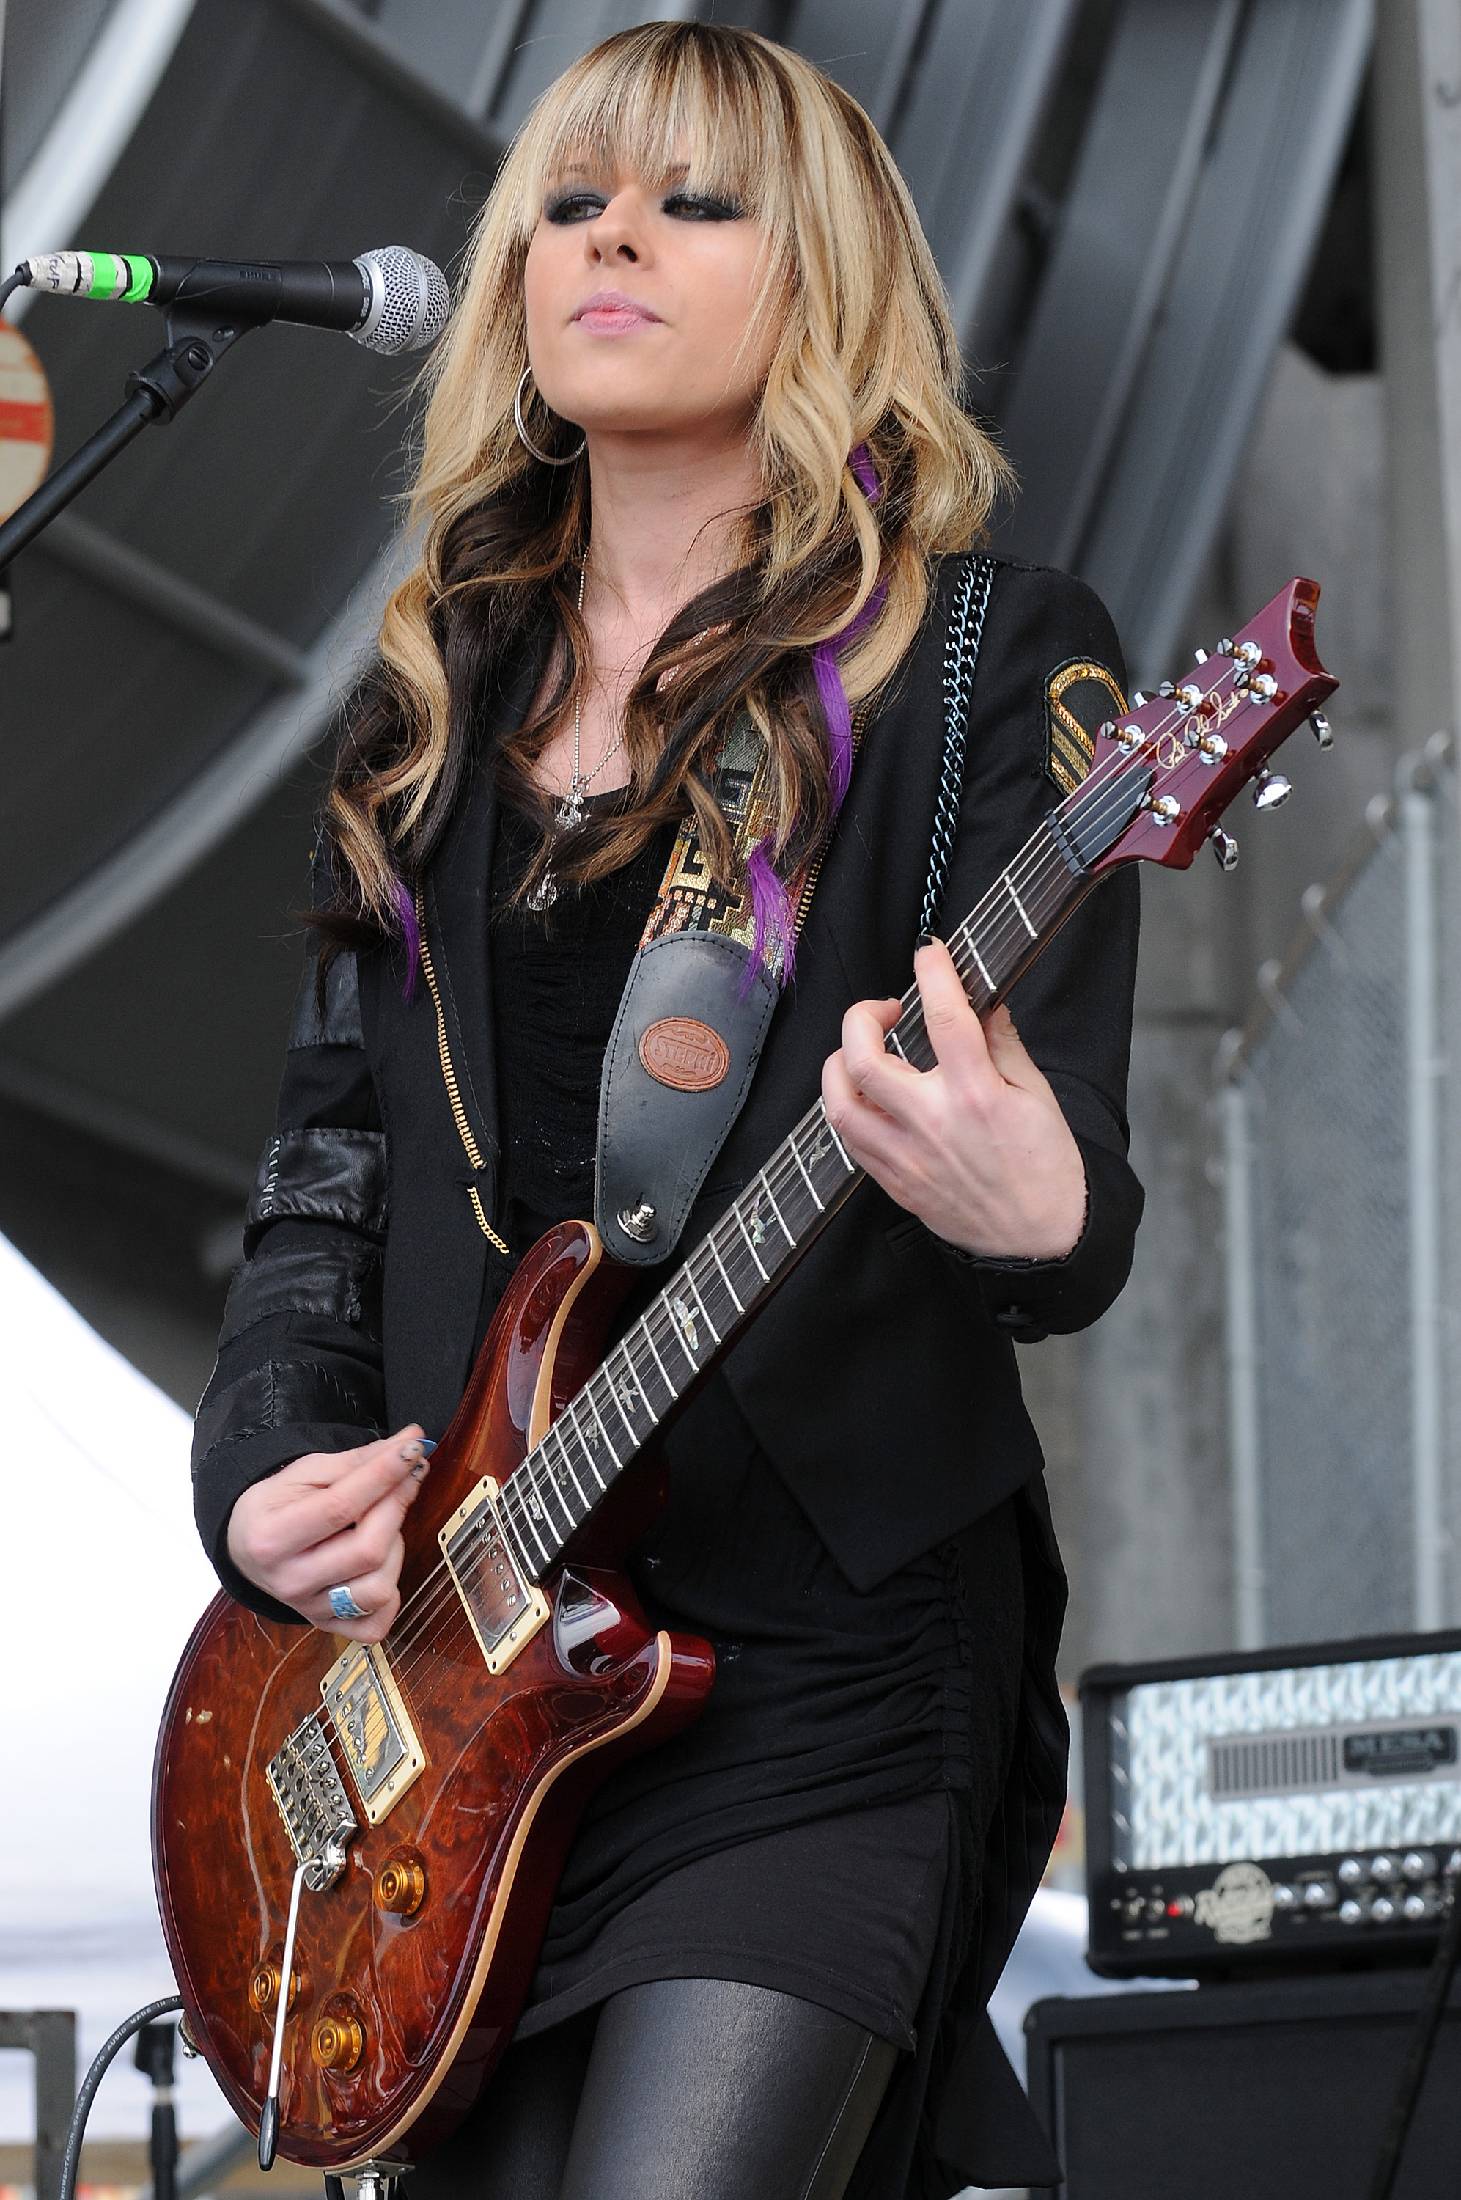 AusCelebs Forums View Topic Orianthi.